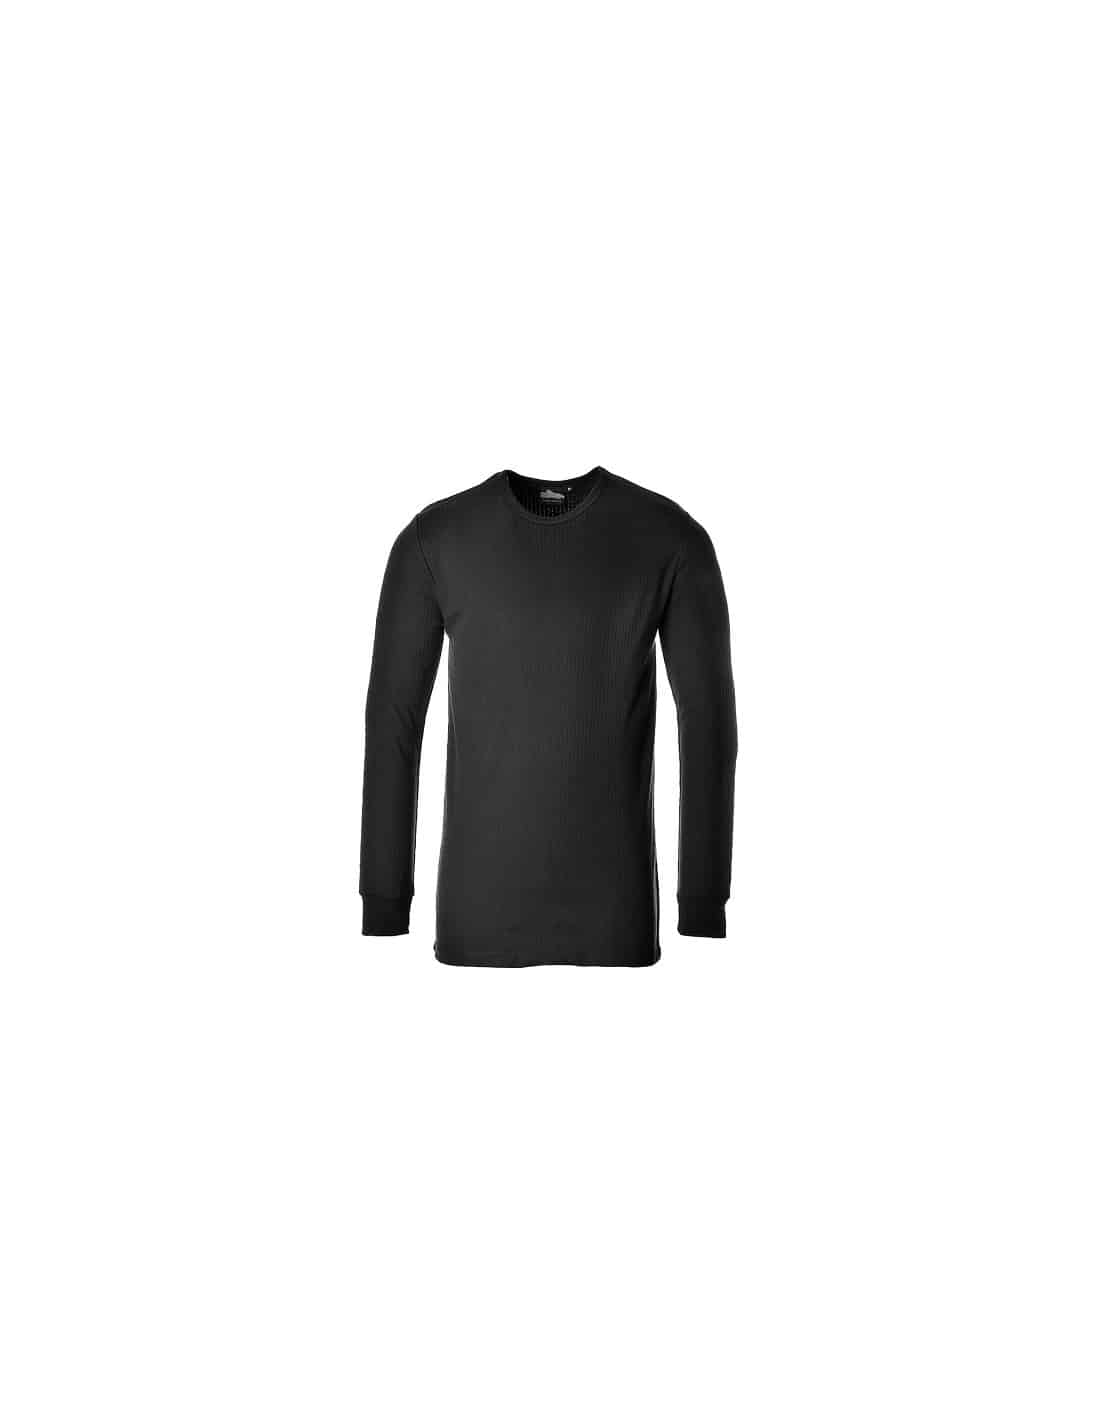 Men's Long Sleeve Thermal Jersey, Protection -20°C